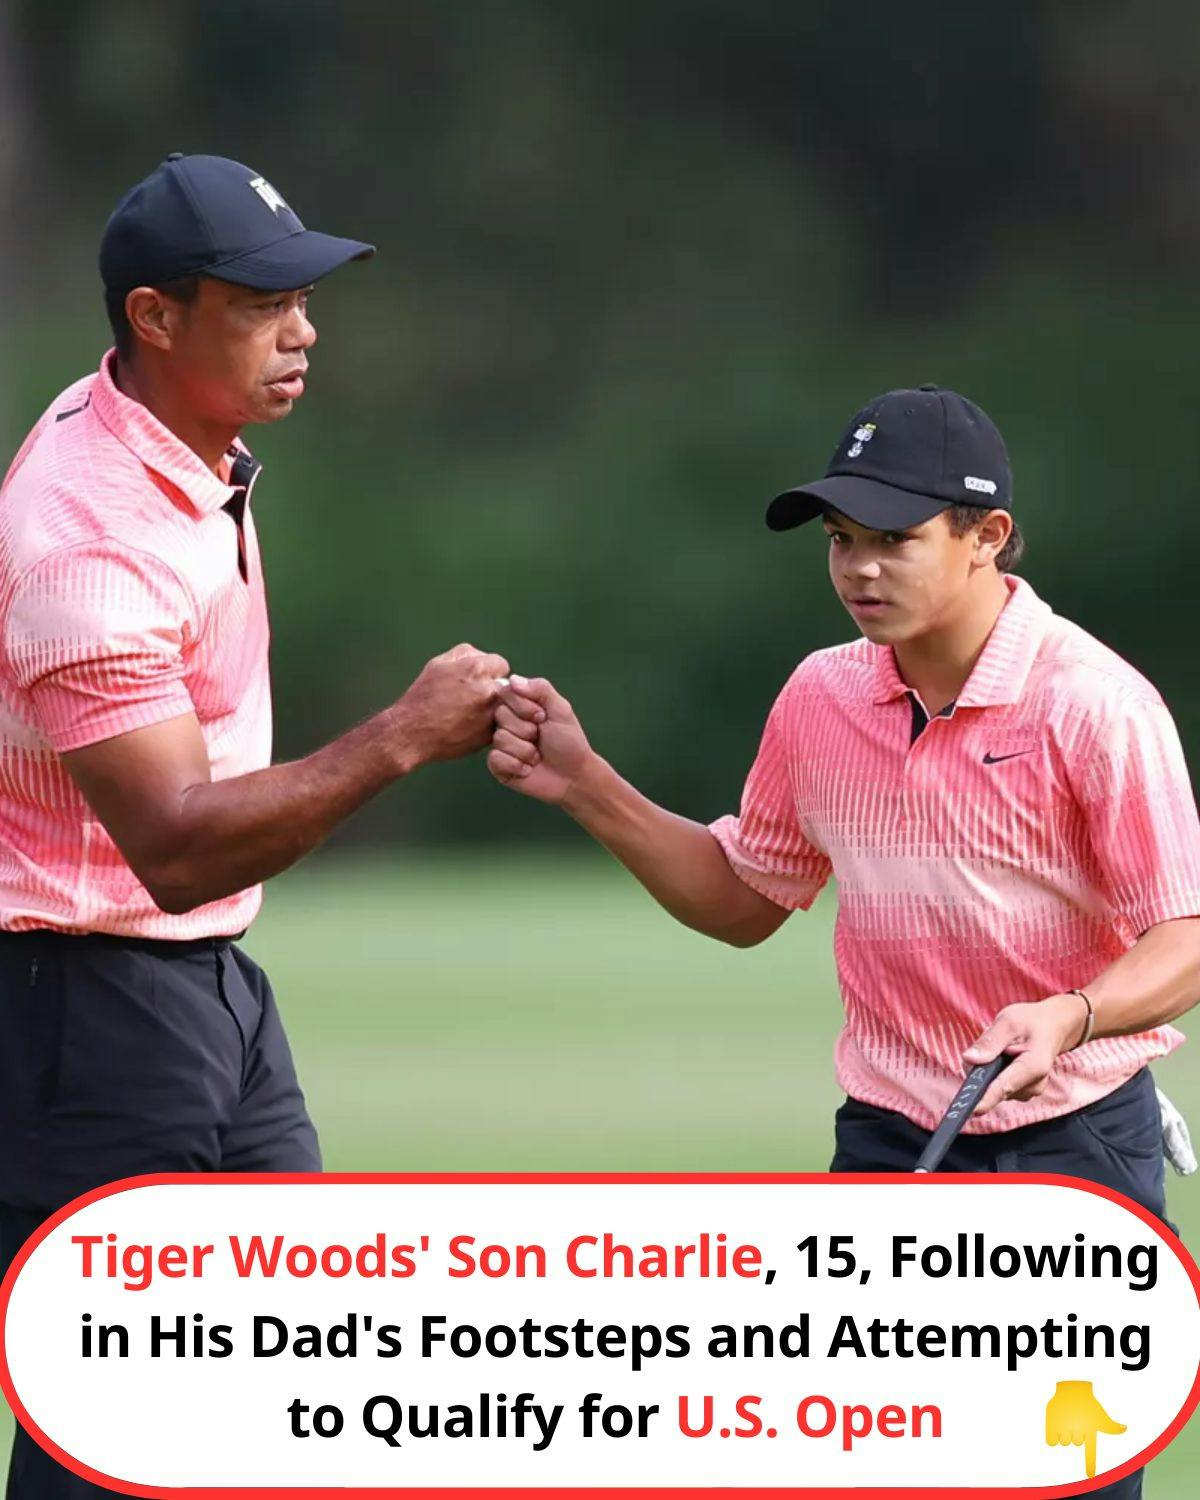 Cover Image for Tiger Woods’ Son Charlie, 15, Following in His Dad’s Footsteps and Attempting to Qualify for U.S. Open